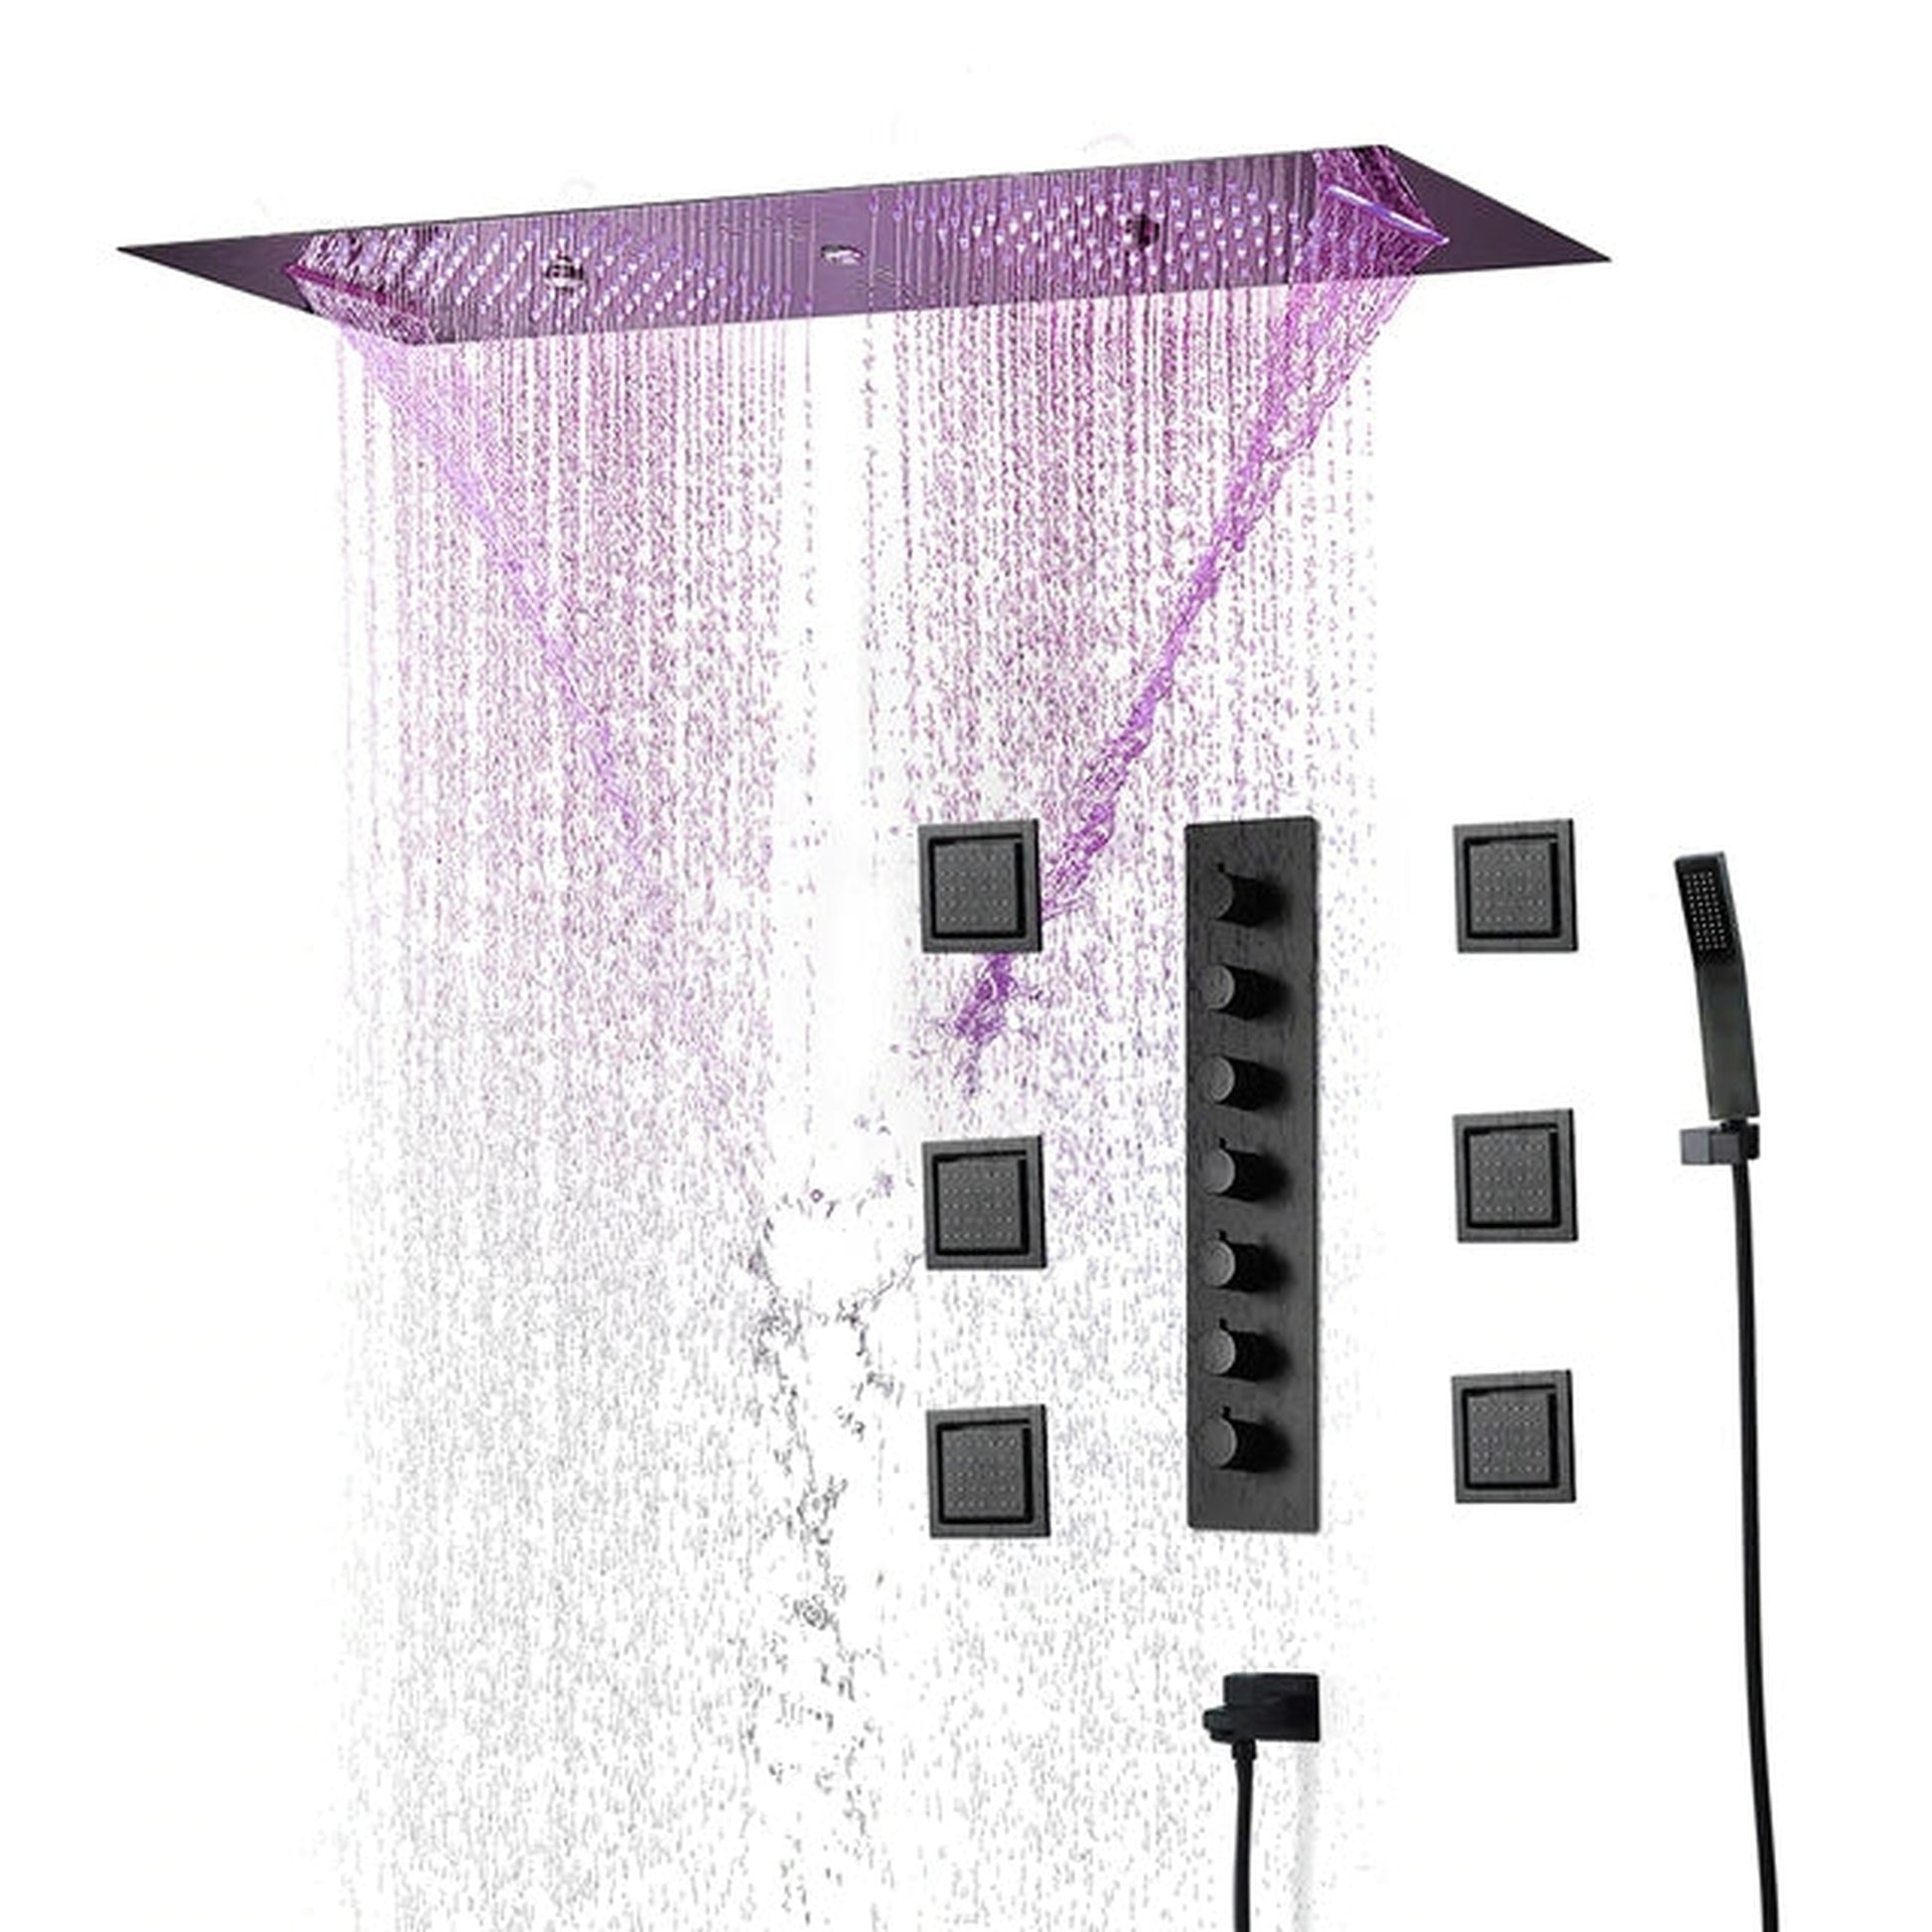 Fontana Cagliari Matte Black Recessed Ceiling Mounted Phone Controlled Thermostatic Musical LED Rainfall Shower System With 6-Jet Body Sprays and Hand Shower